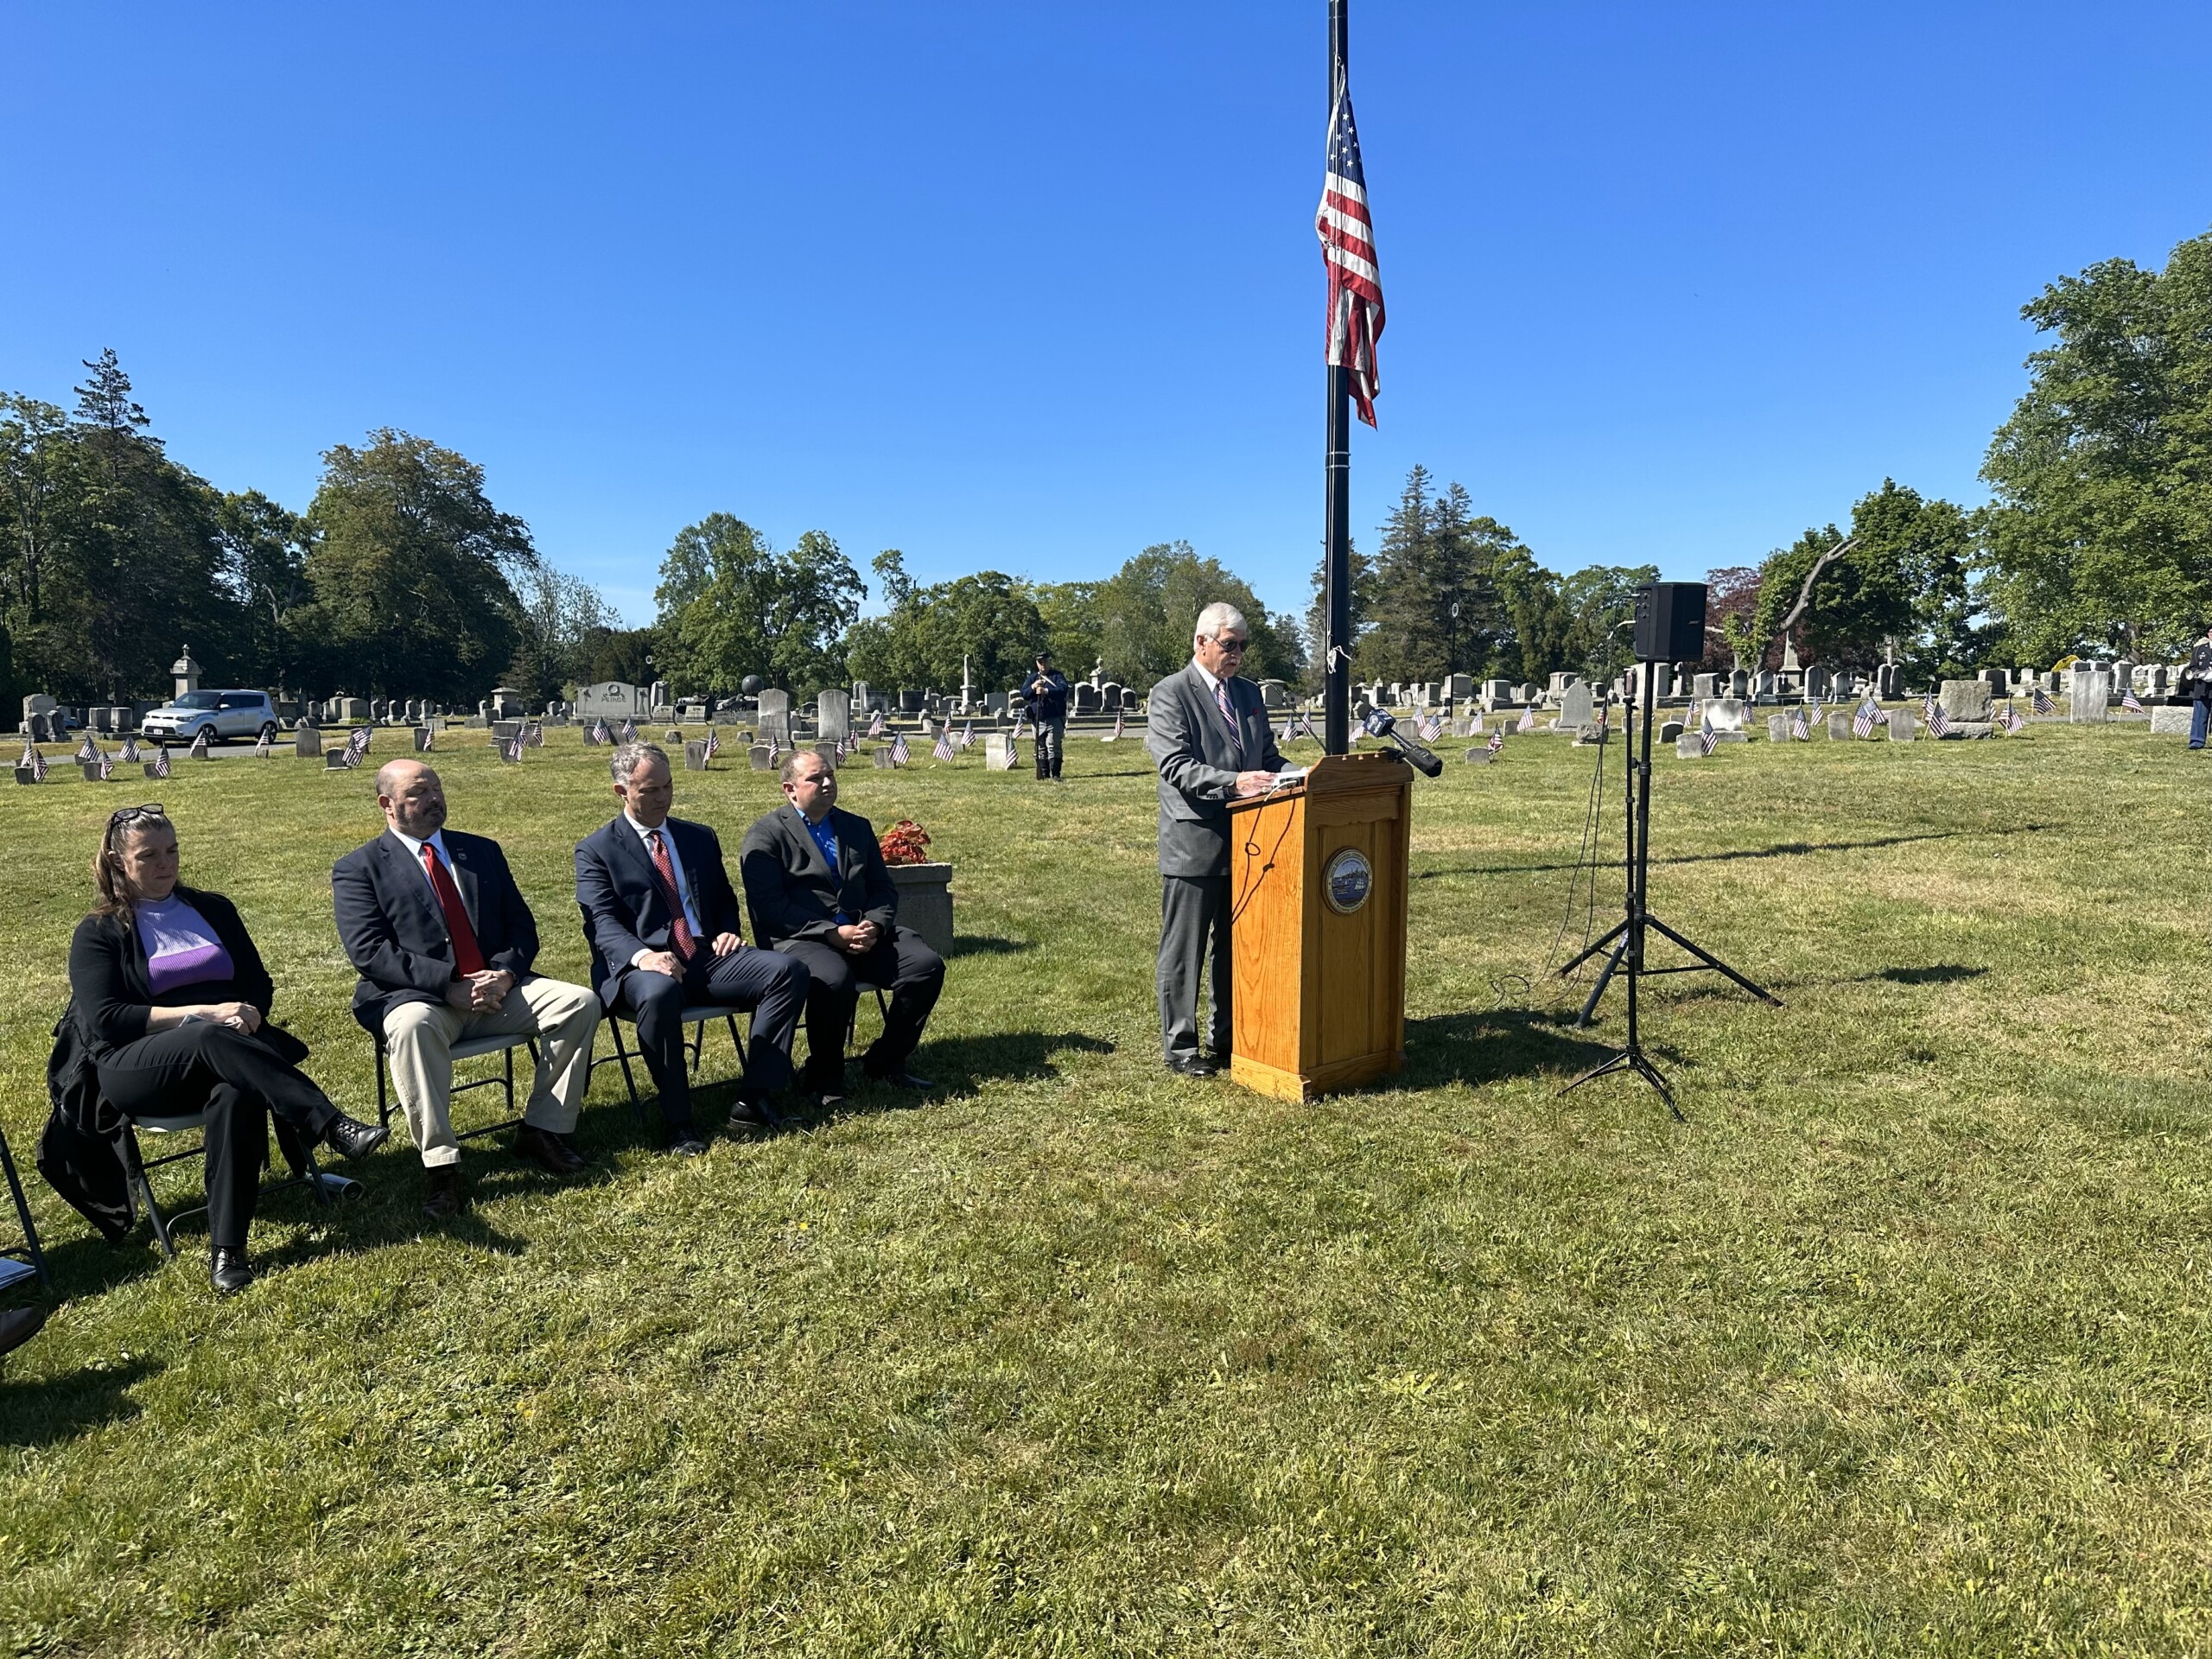 New Bedford commemorates Memorial Day with Civil War exercise ABC6